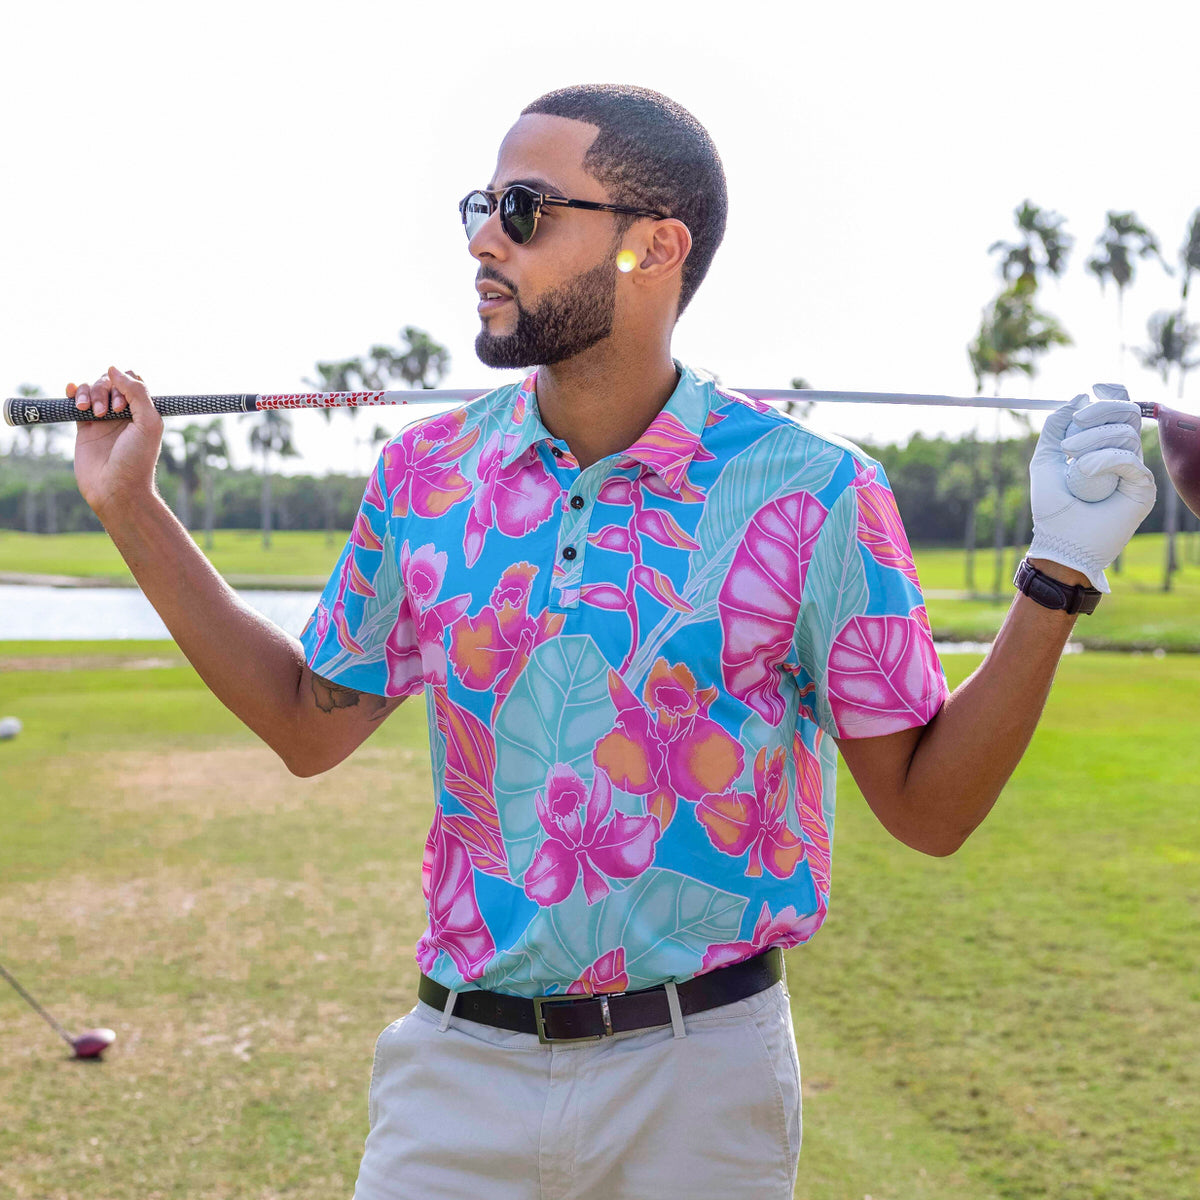 The Slice of Paradise - Mens Golf Shirt by Kenny Flowers